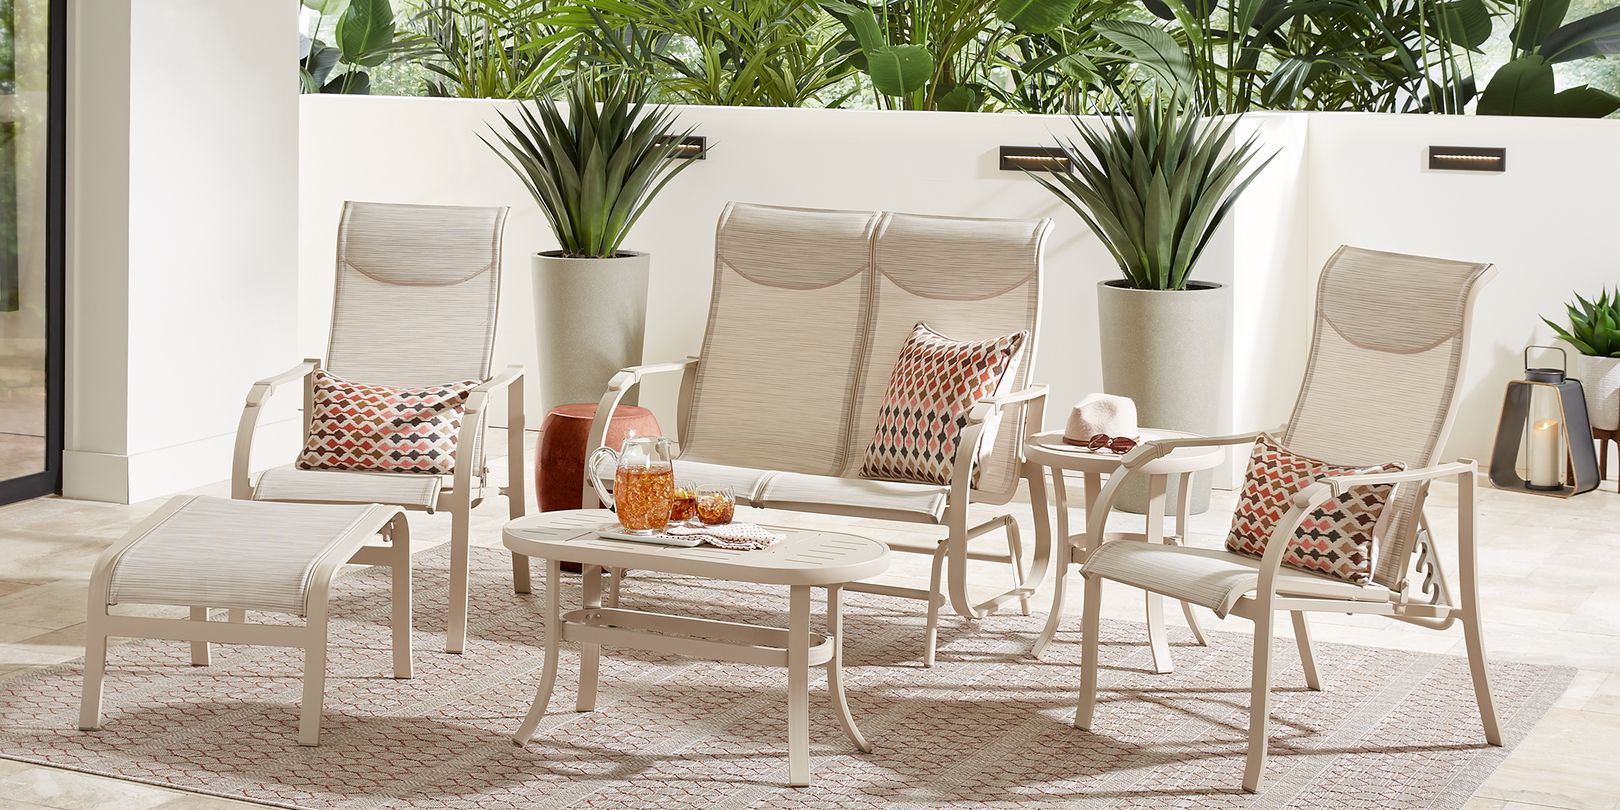 photo of 4 piece putdoor seating set with sling chairs